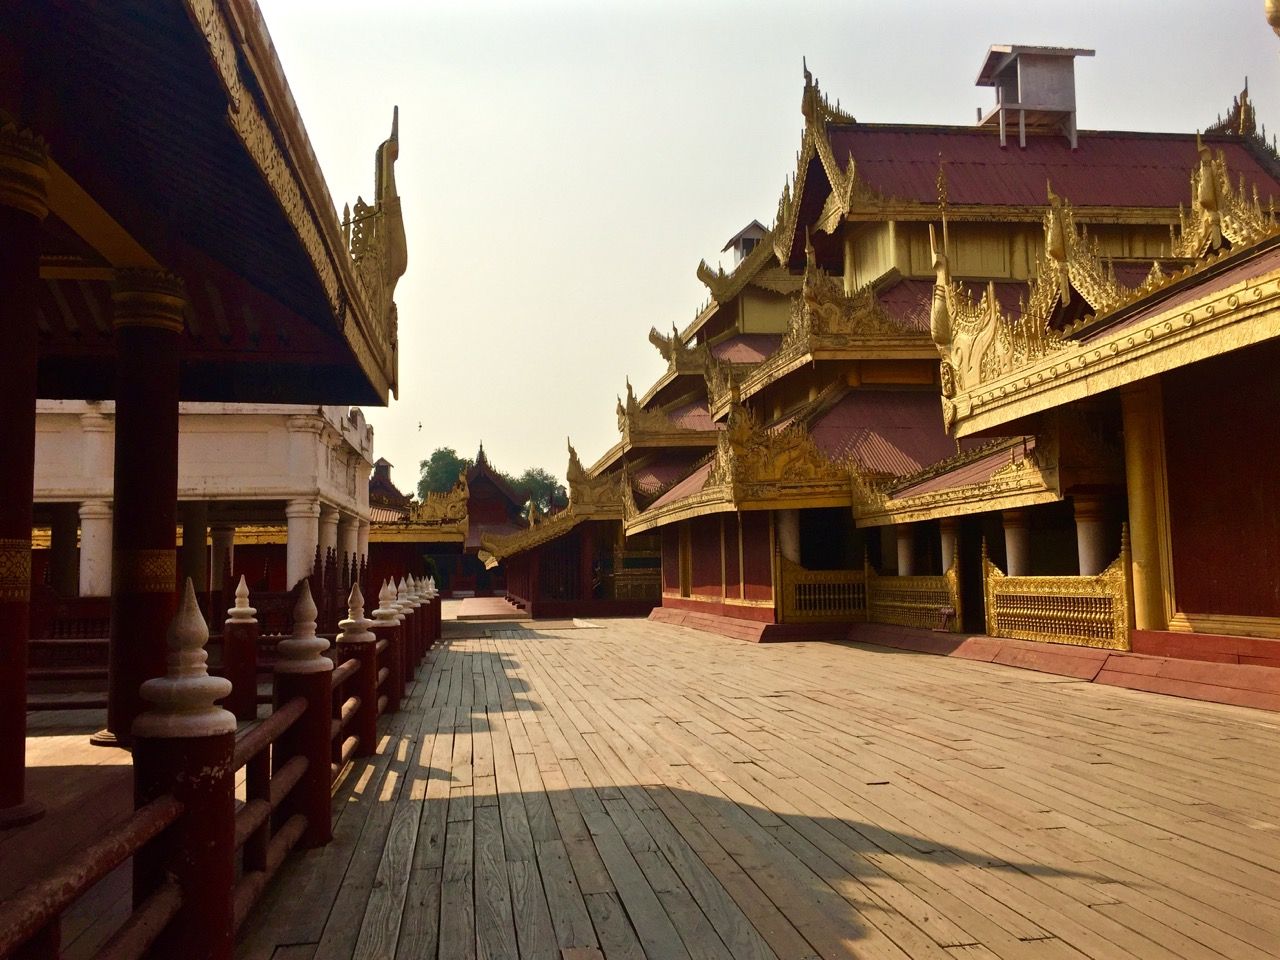 A long empty corridor lined with royal buildings.